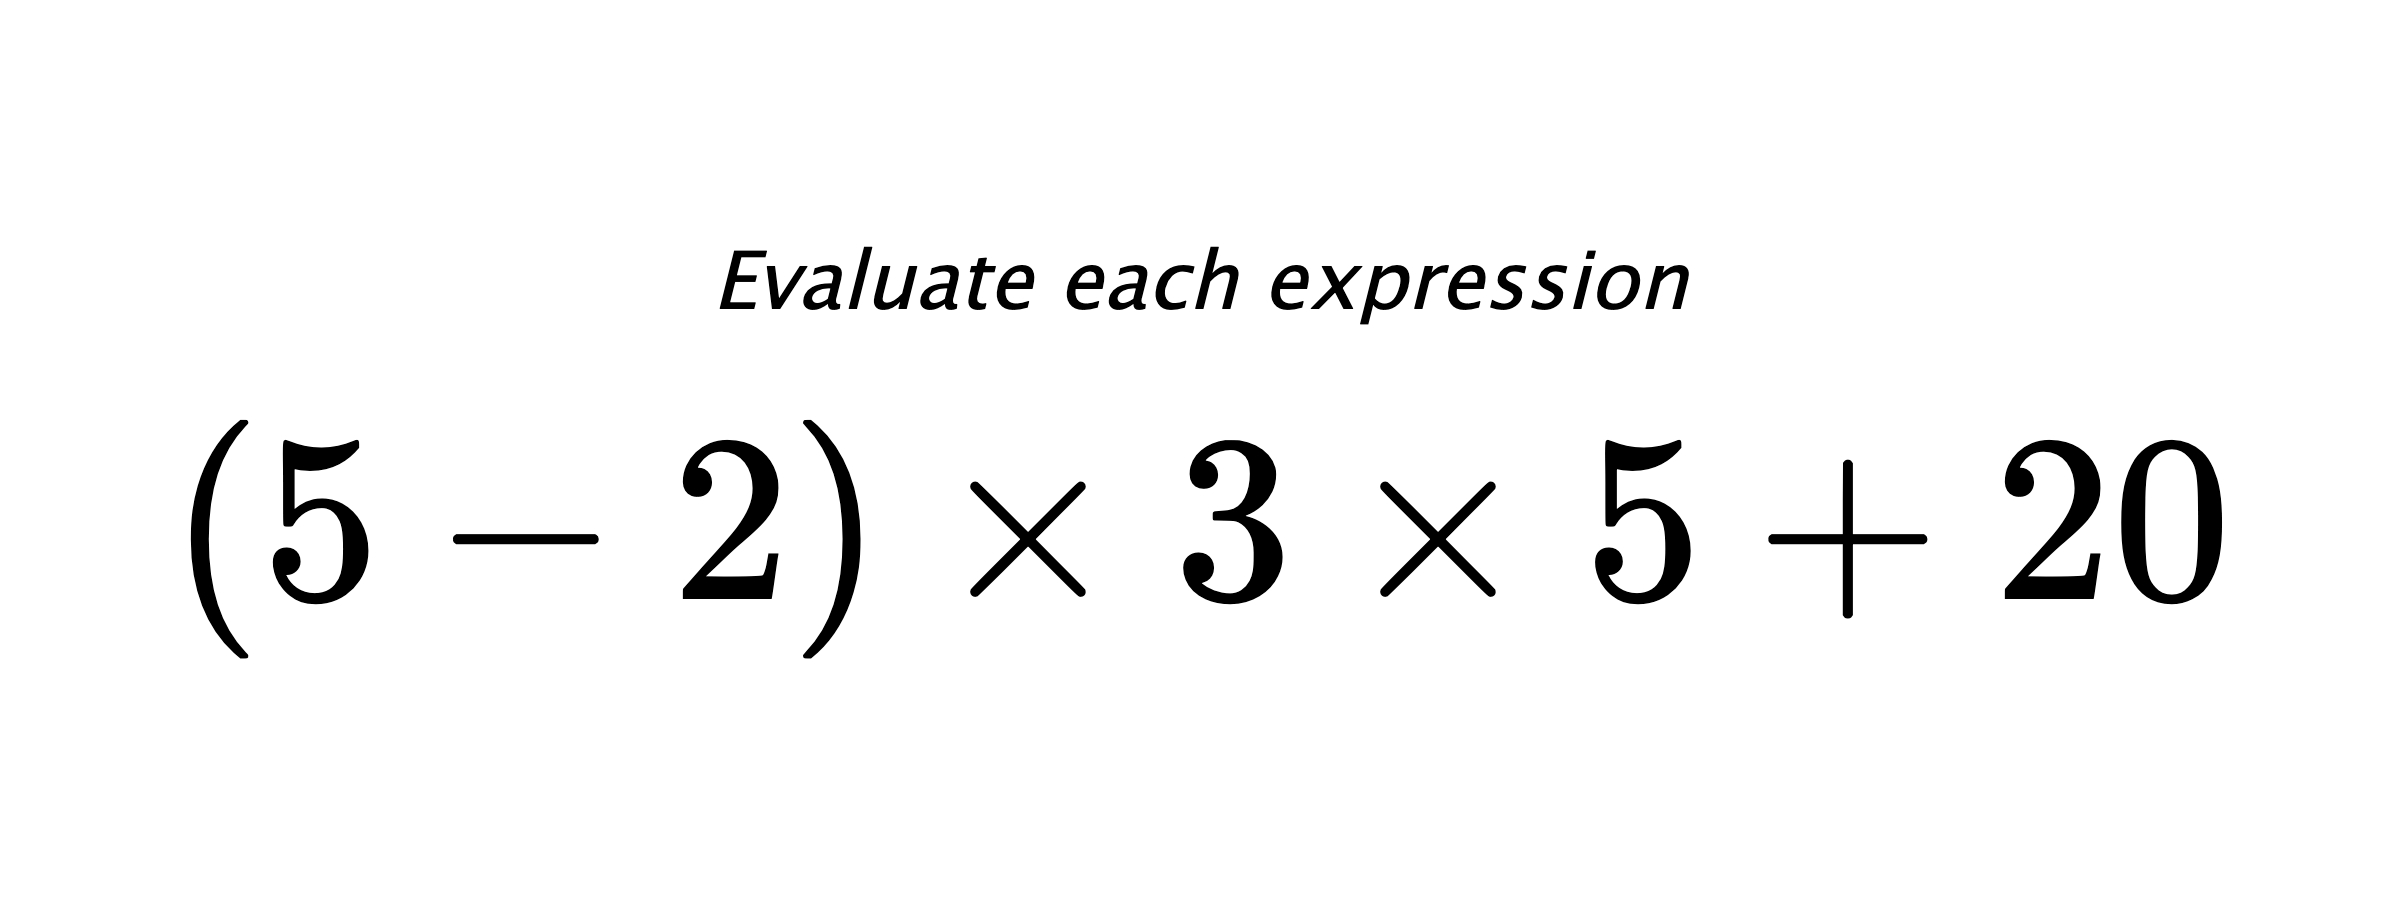 Evaluate each expression $ (5-2) \times 3 \times 5 + 20 $